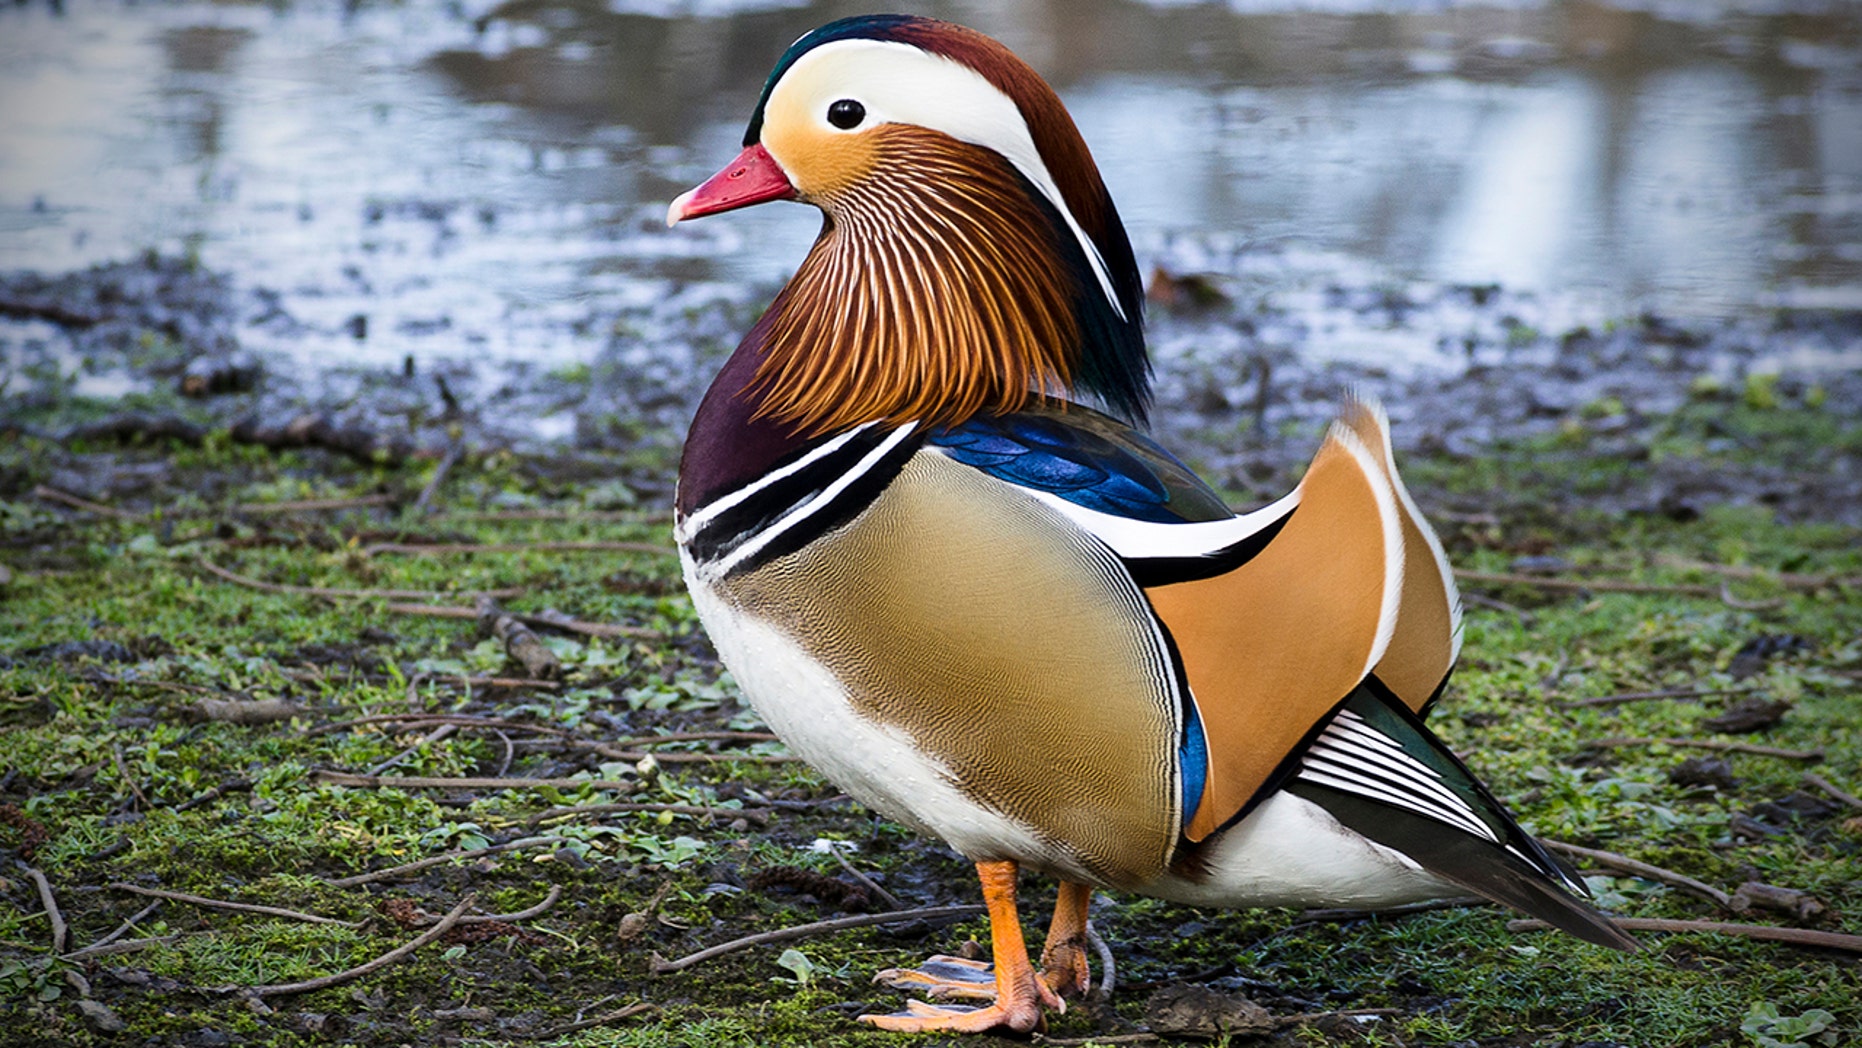 New York’s Central Park is now home to a rare and colorful Mandarin ...